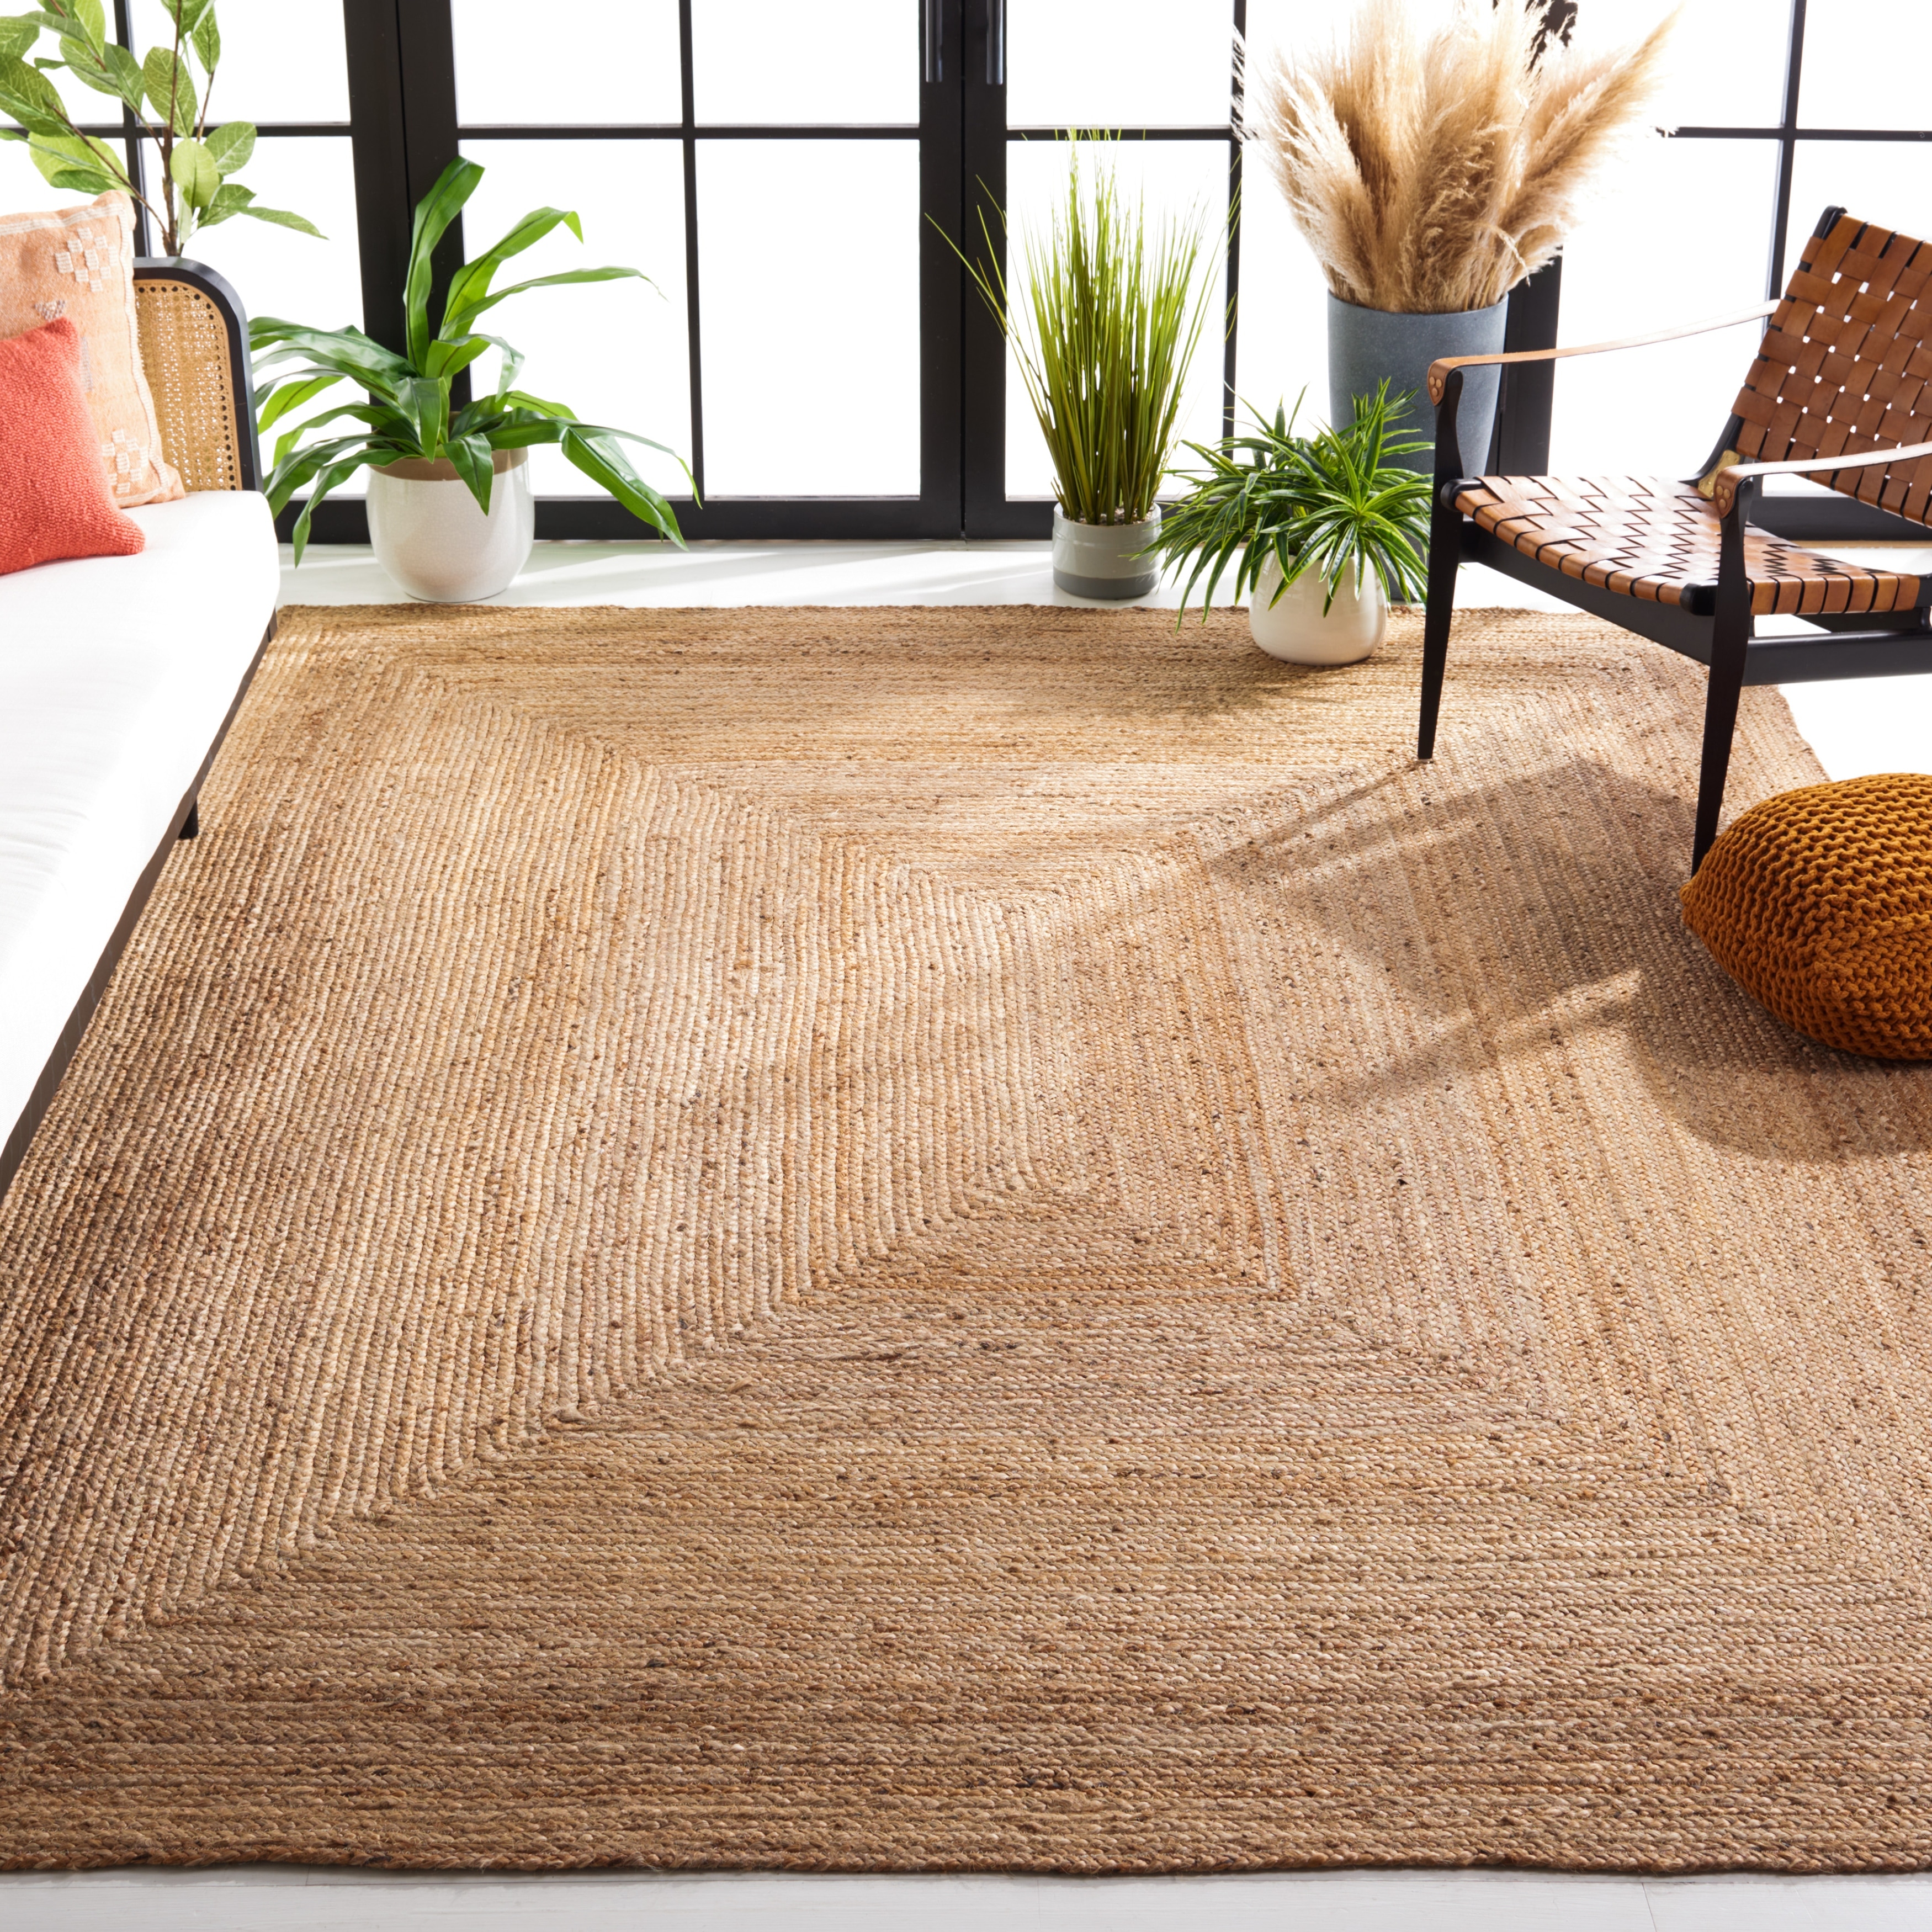 Braided, Oval Area Rugs - Bed Bath & Beyond